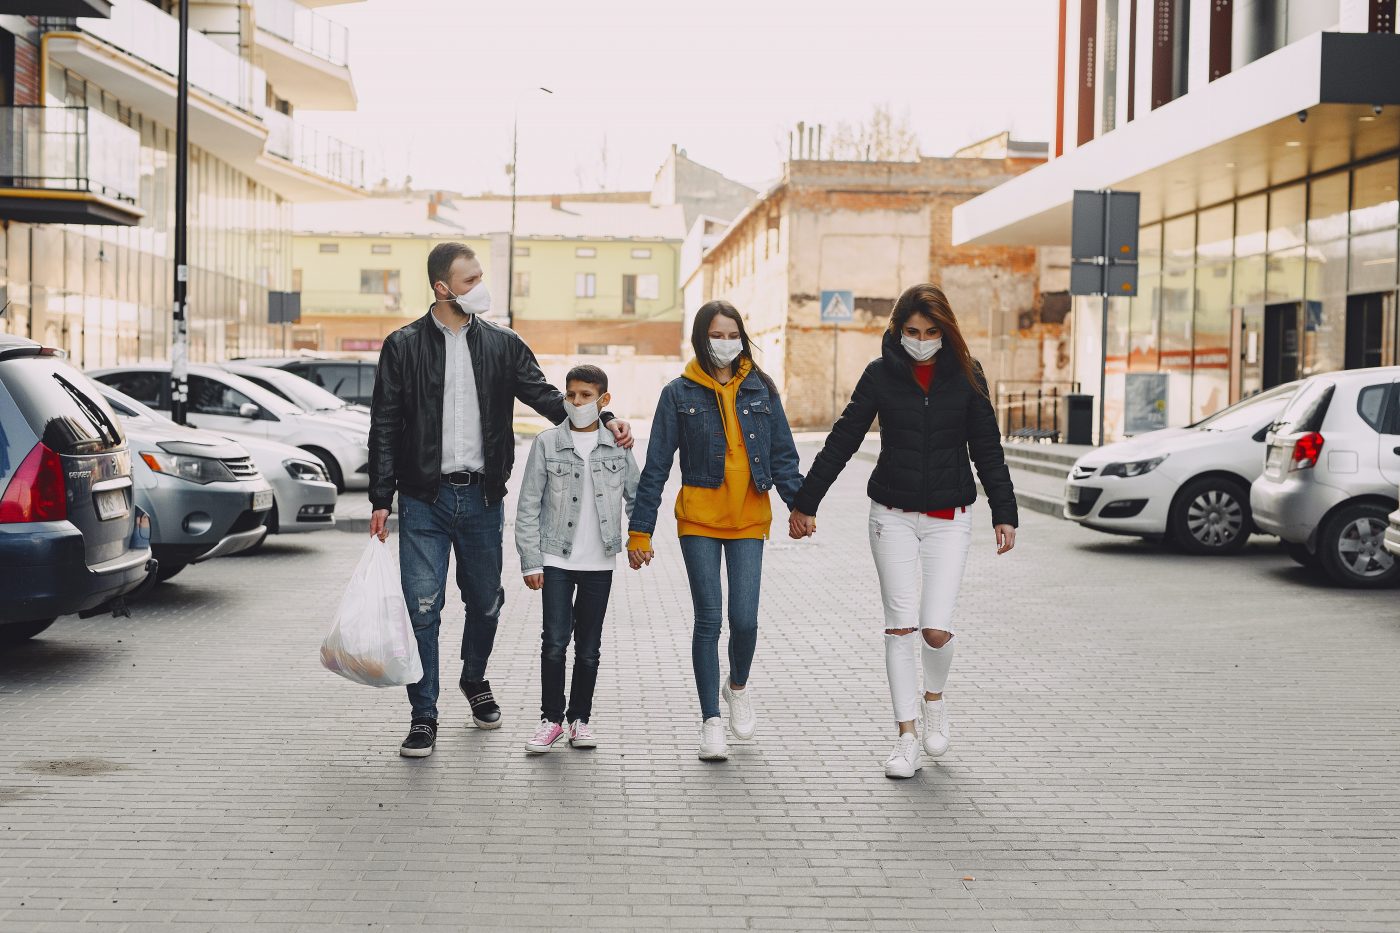 man, boy, girl, and woman walking down a street together while wearing masks